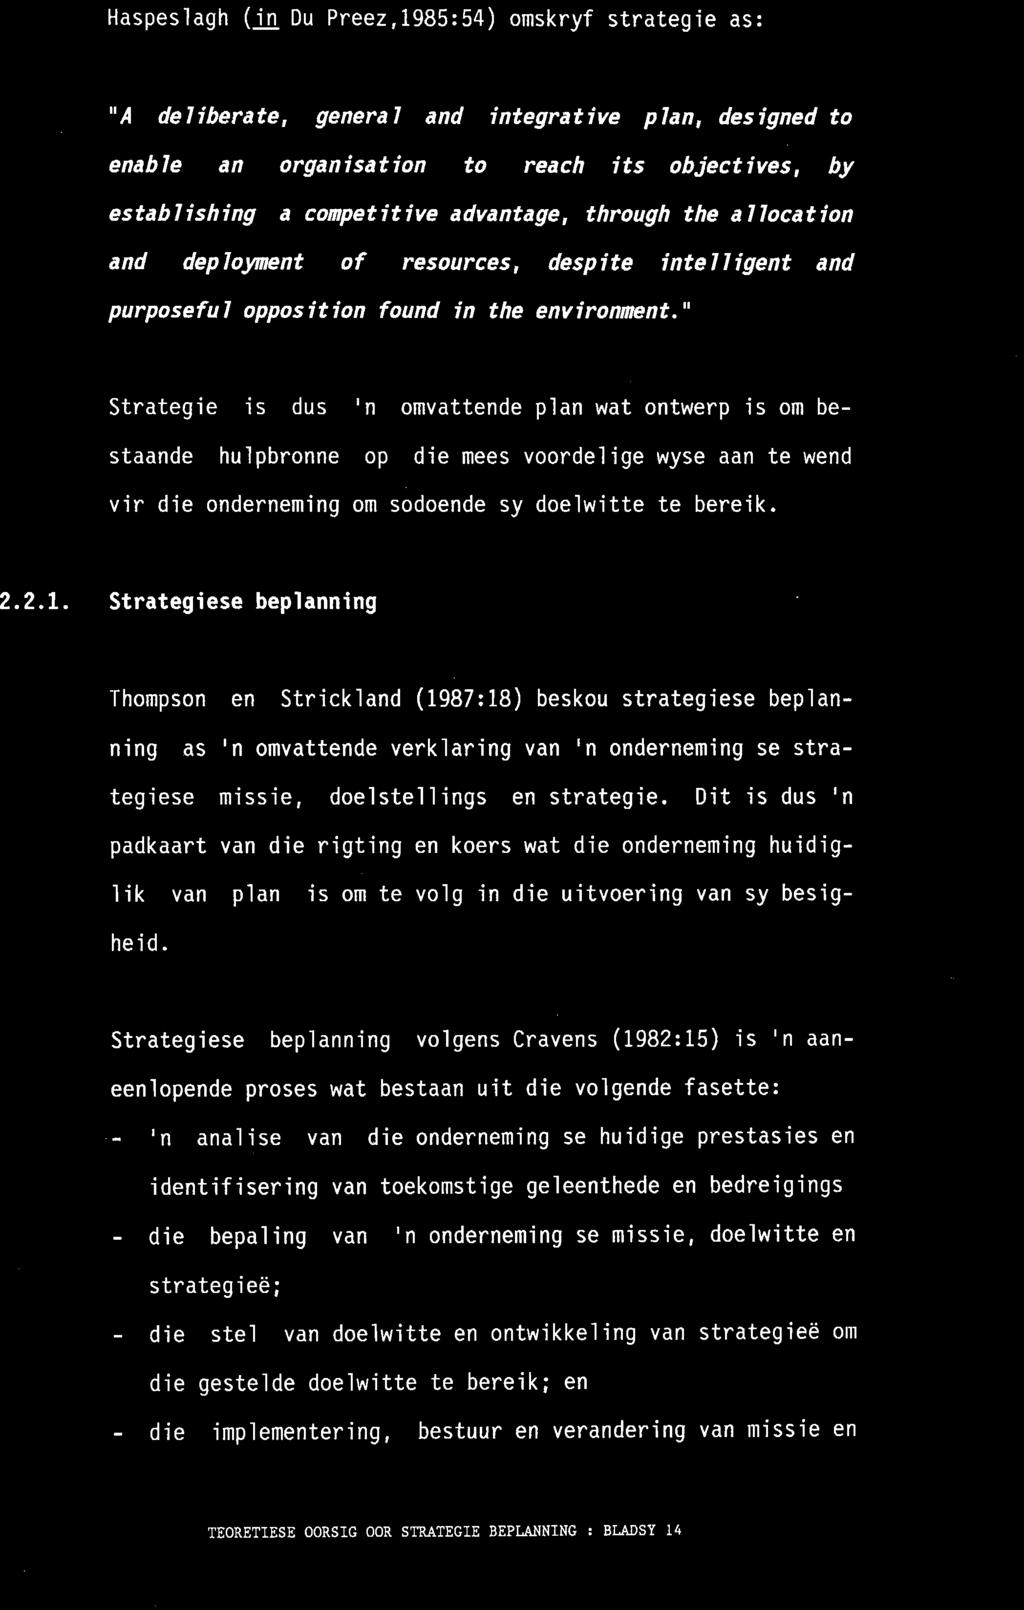 Haspeslagh (in Du Preez, 1985:54) omskryf strategie as: " A de 7 ibera te, genera 7 and integra t ive p 7an, des igned to enab7e an organisation to reach its objectives, by es tab 7 ish ing a compet